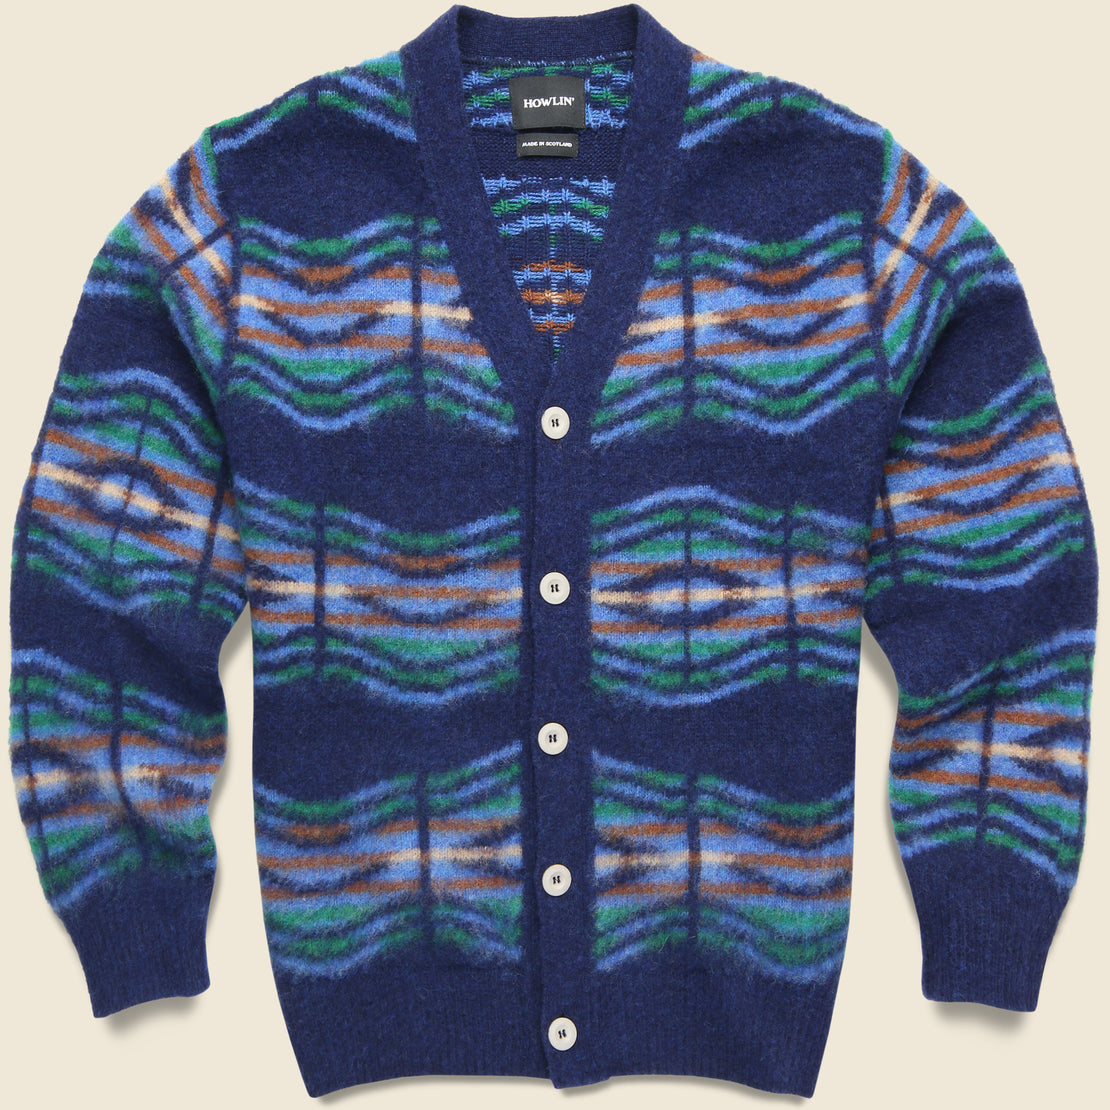 Howlin Out of This World Cardigan - Magic Blue